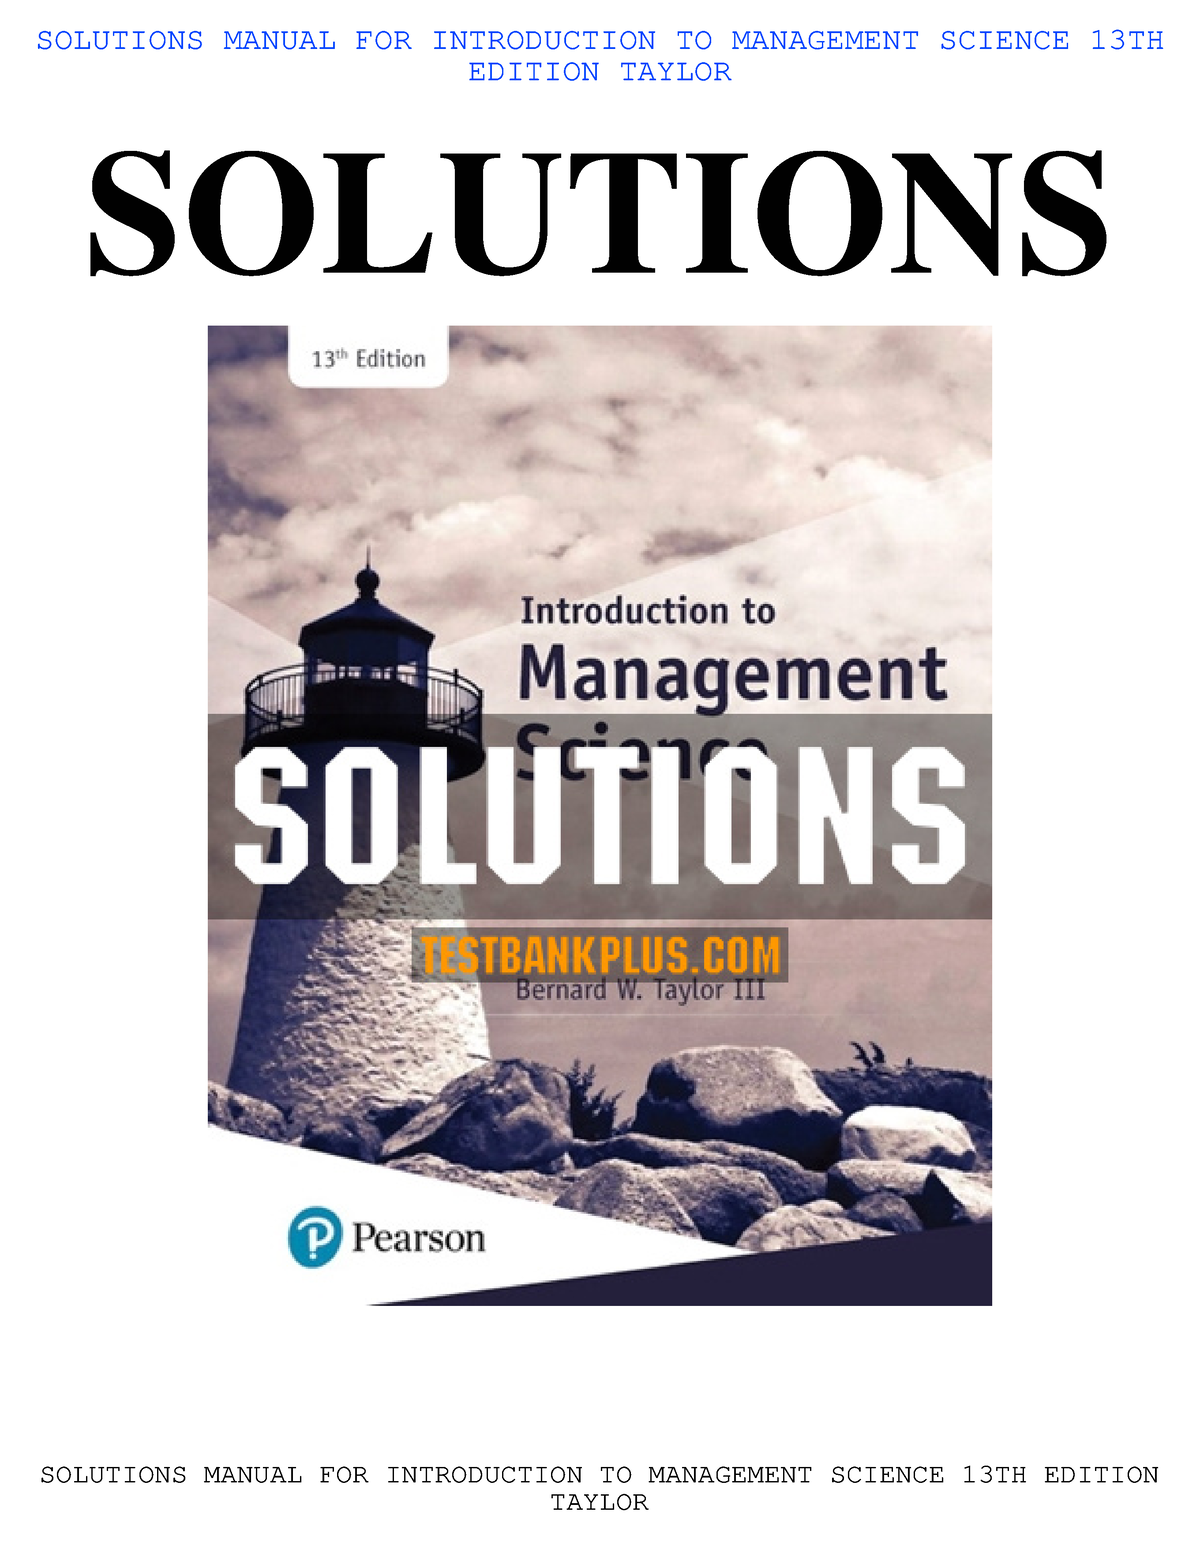 Solution to Management Science Problems - SOLUTIONS MANUAL FOR